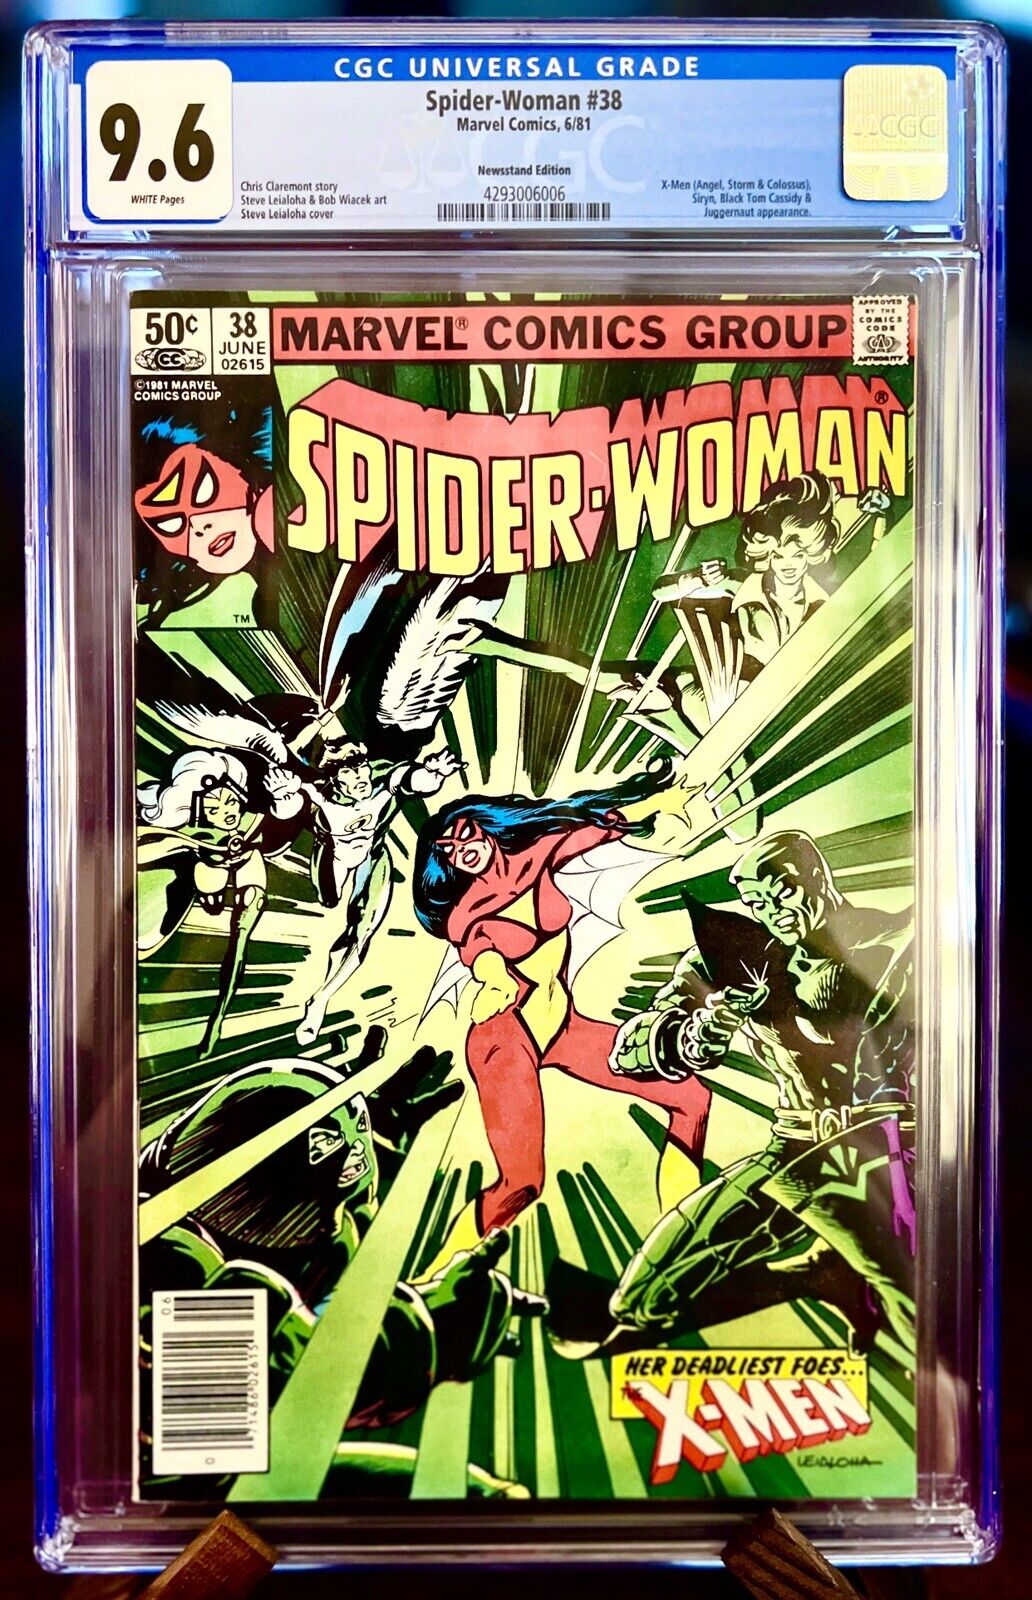 Spider-Woman # 38 (1981) Bronze Age X-Men - CGC 9.6 Near Mint+ with White Pages